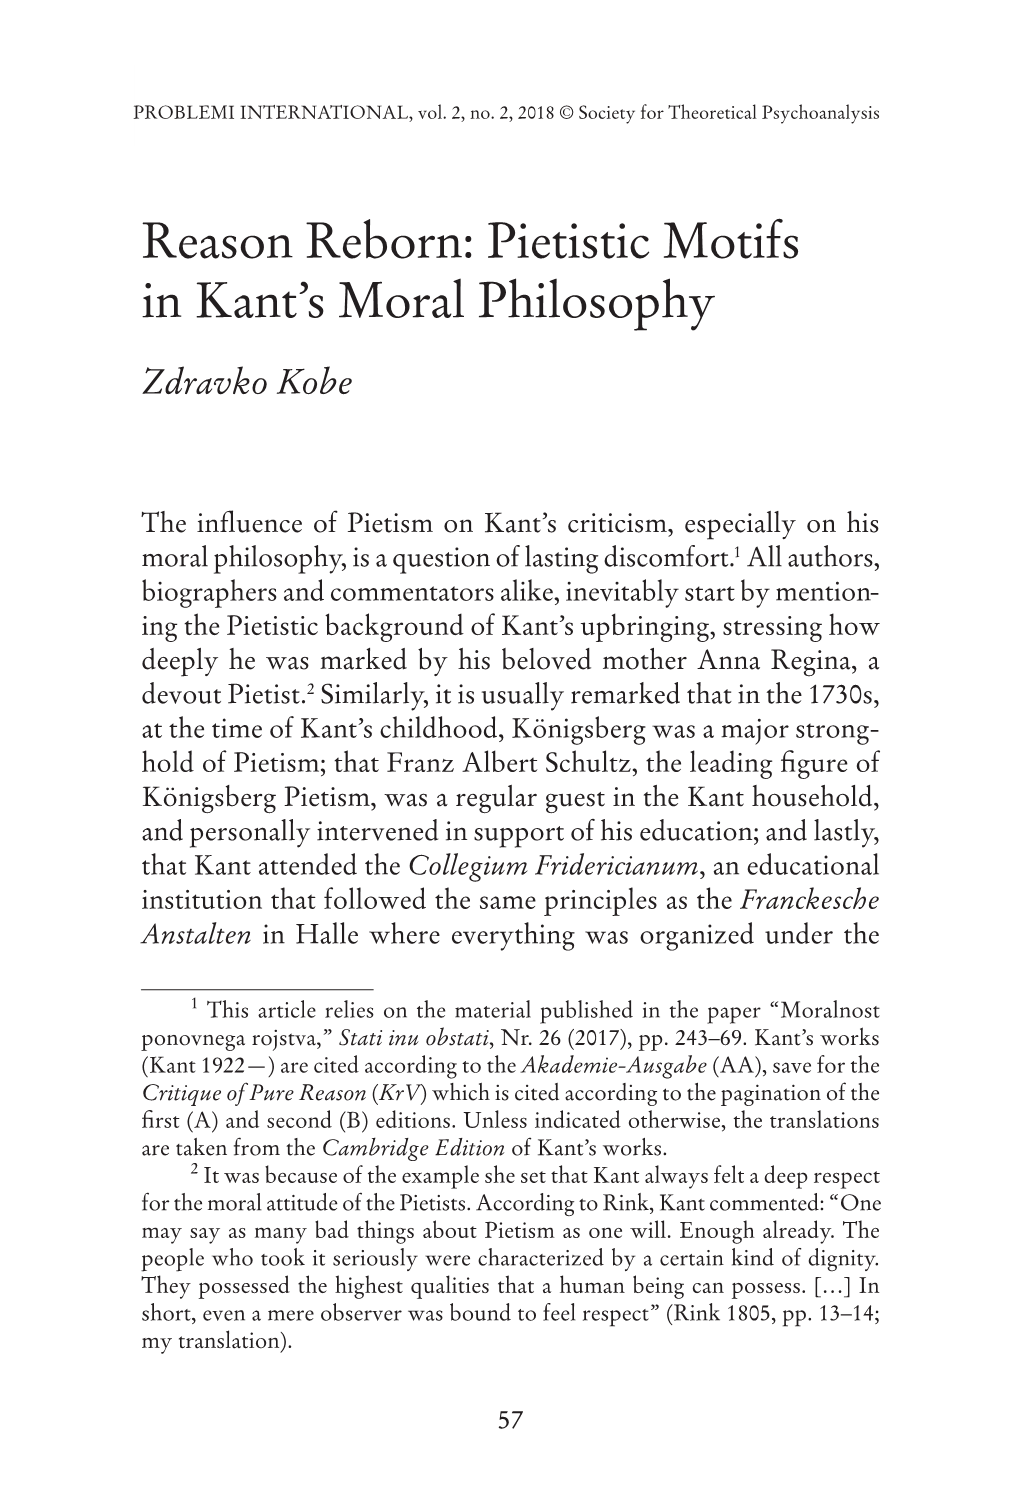 Pietistic Motifs in Kant's Moral Philosophy